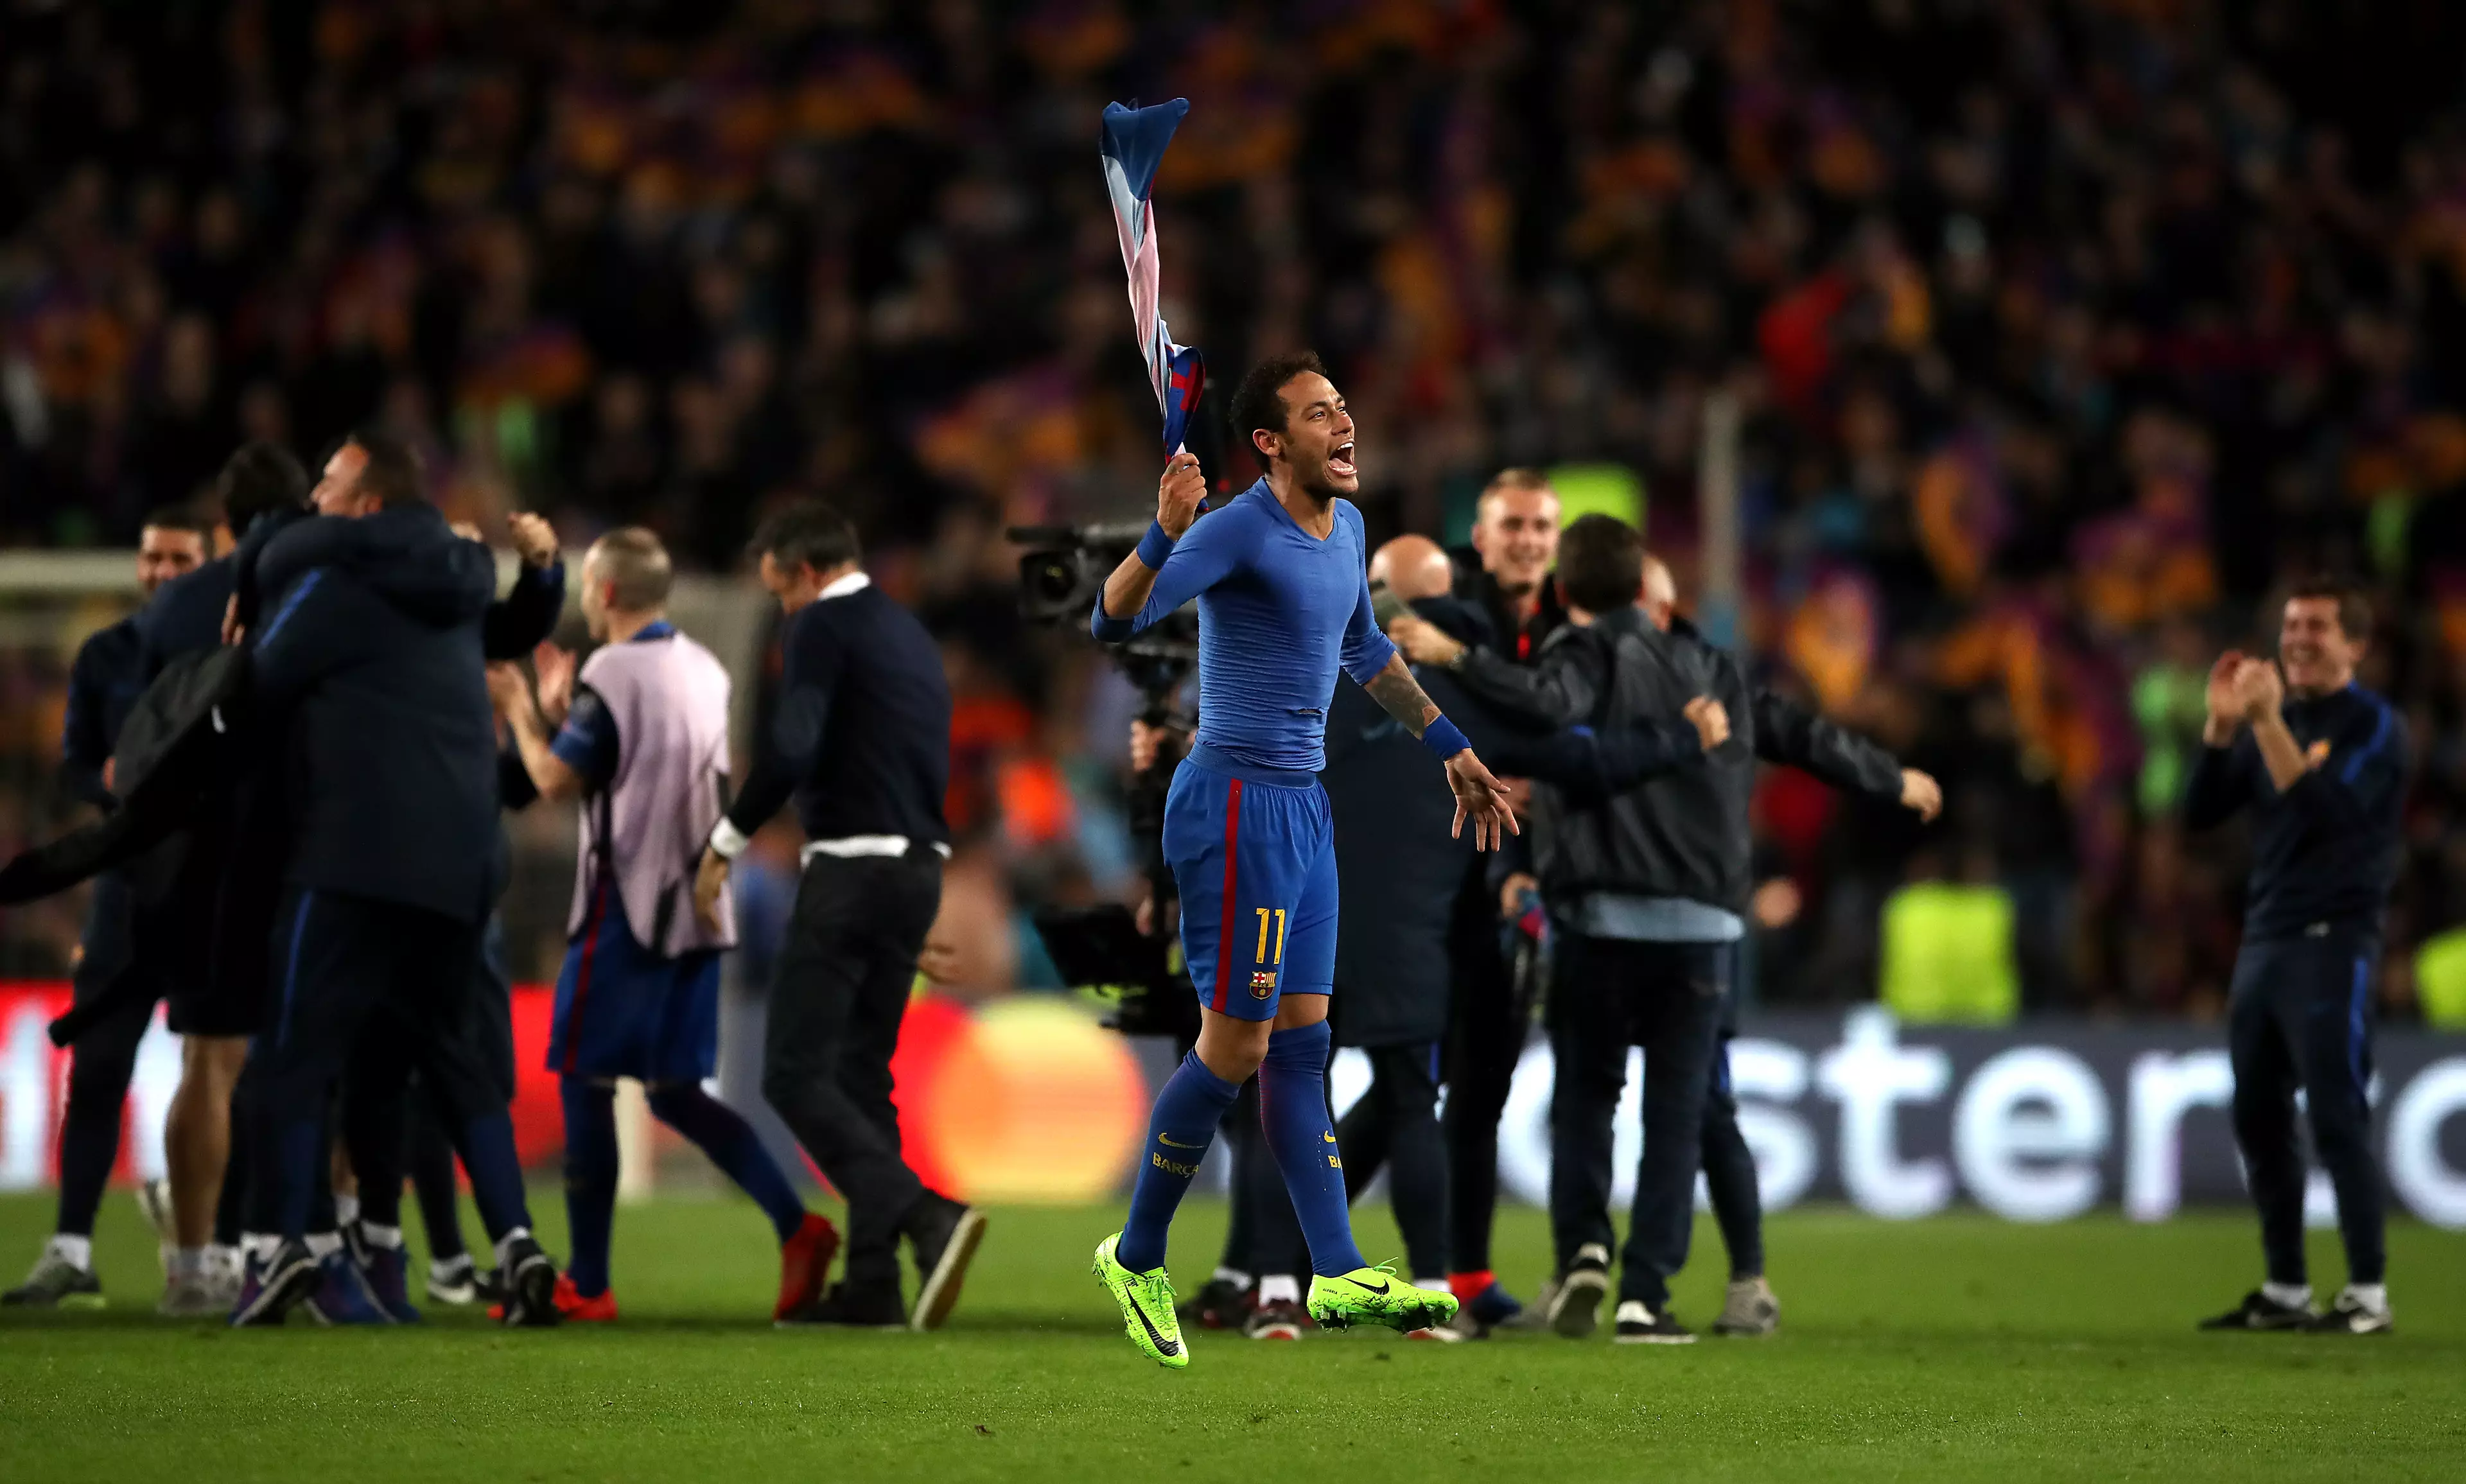 Neymar was key in the famous game in 2017 but was then injured just days later. Image : PA Images